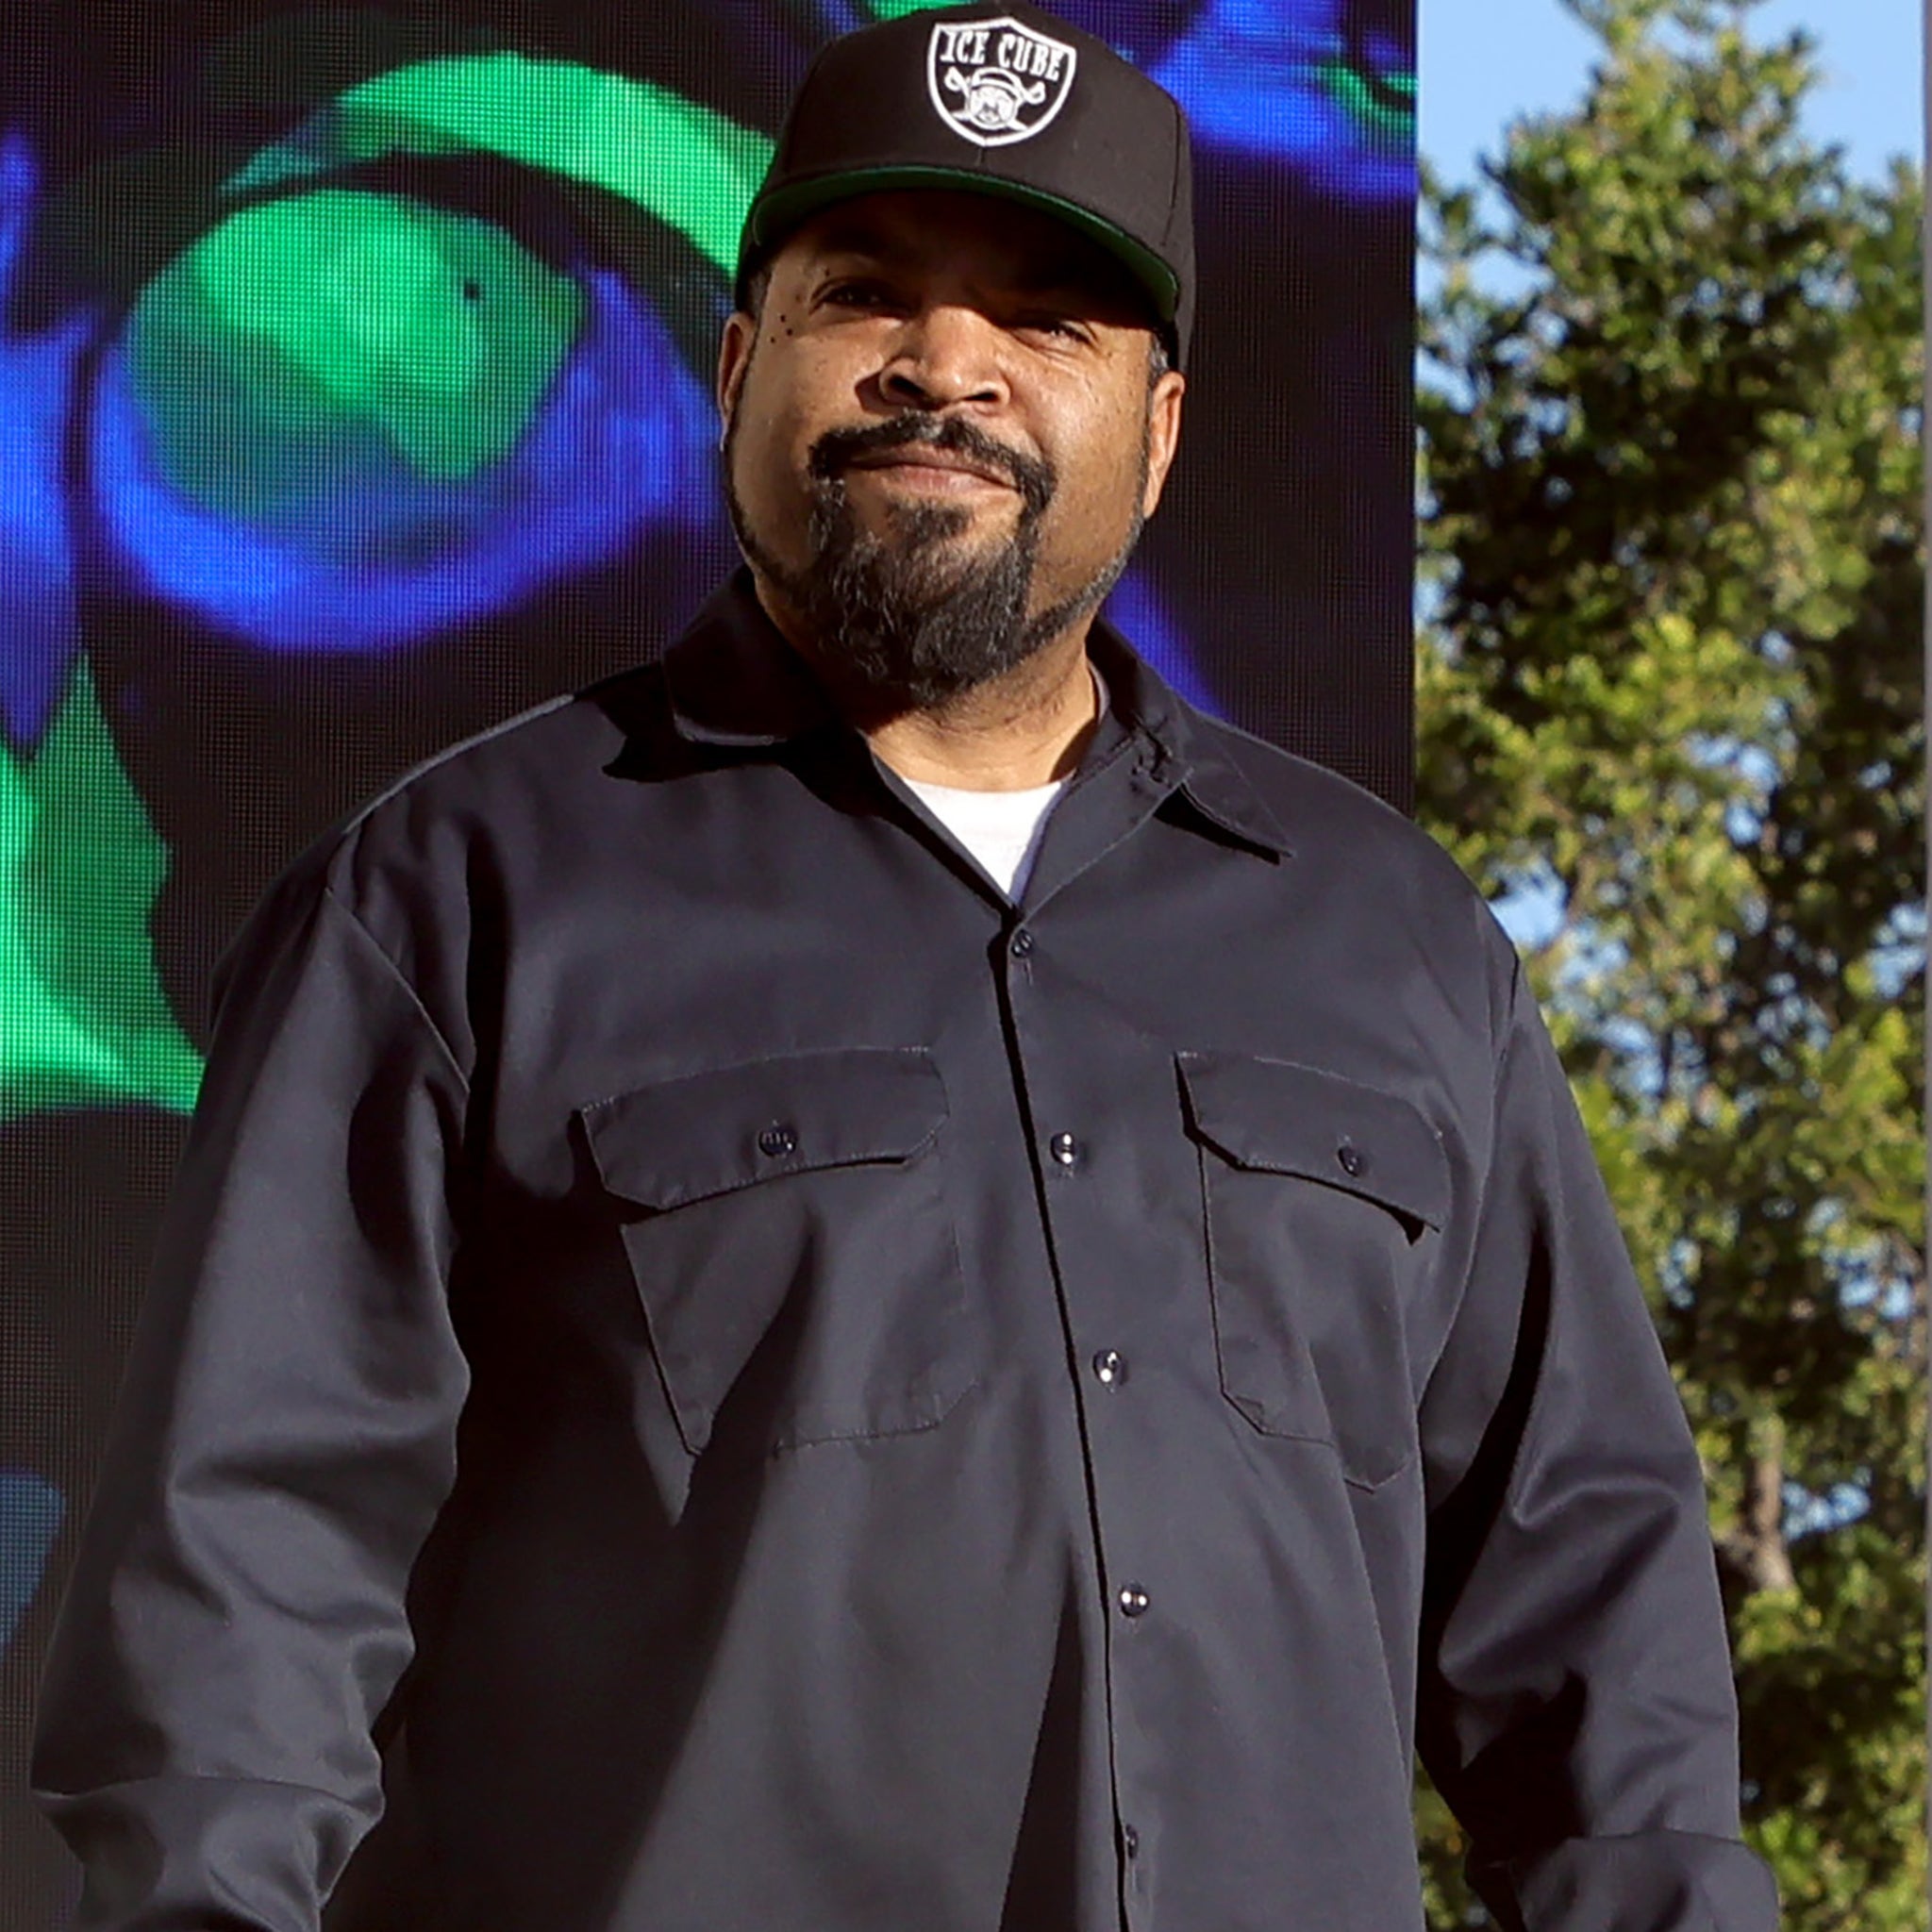 Ice Cube Lost $9 Million Film Role Because He Refused COVID Shot